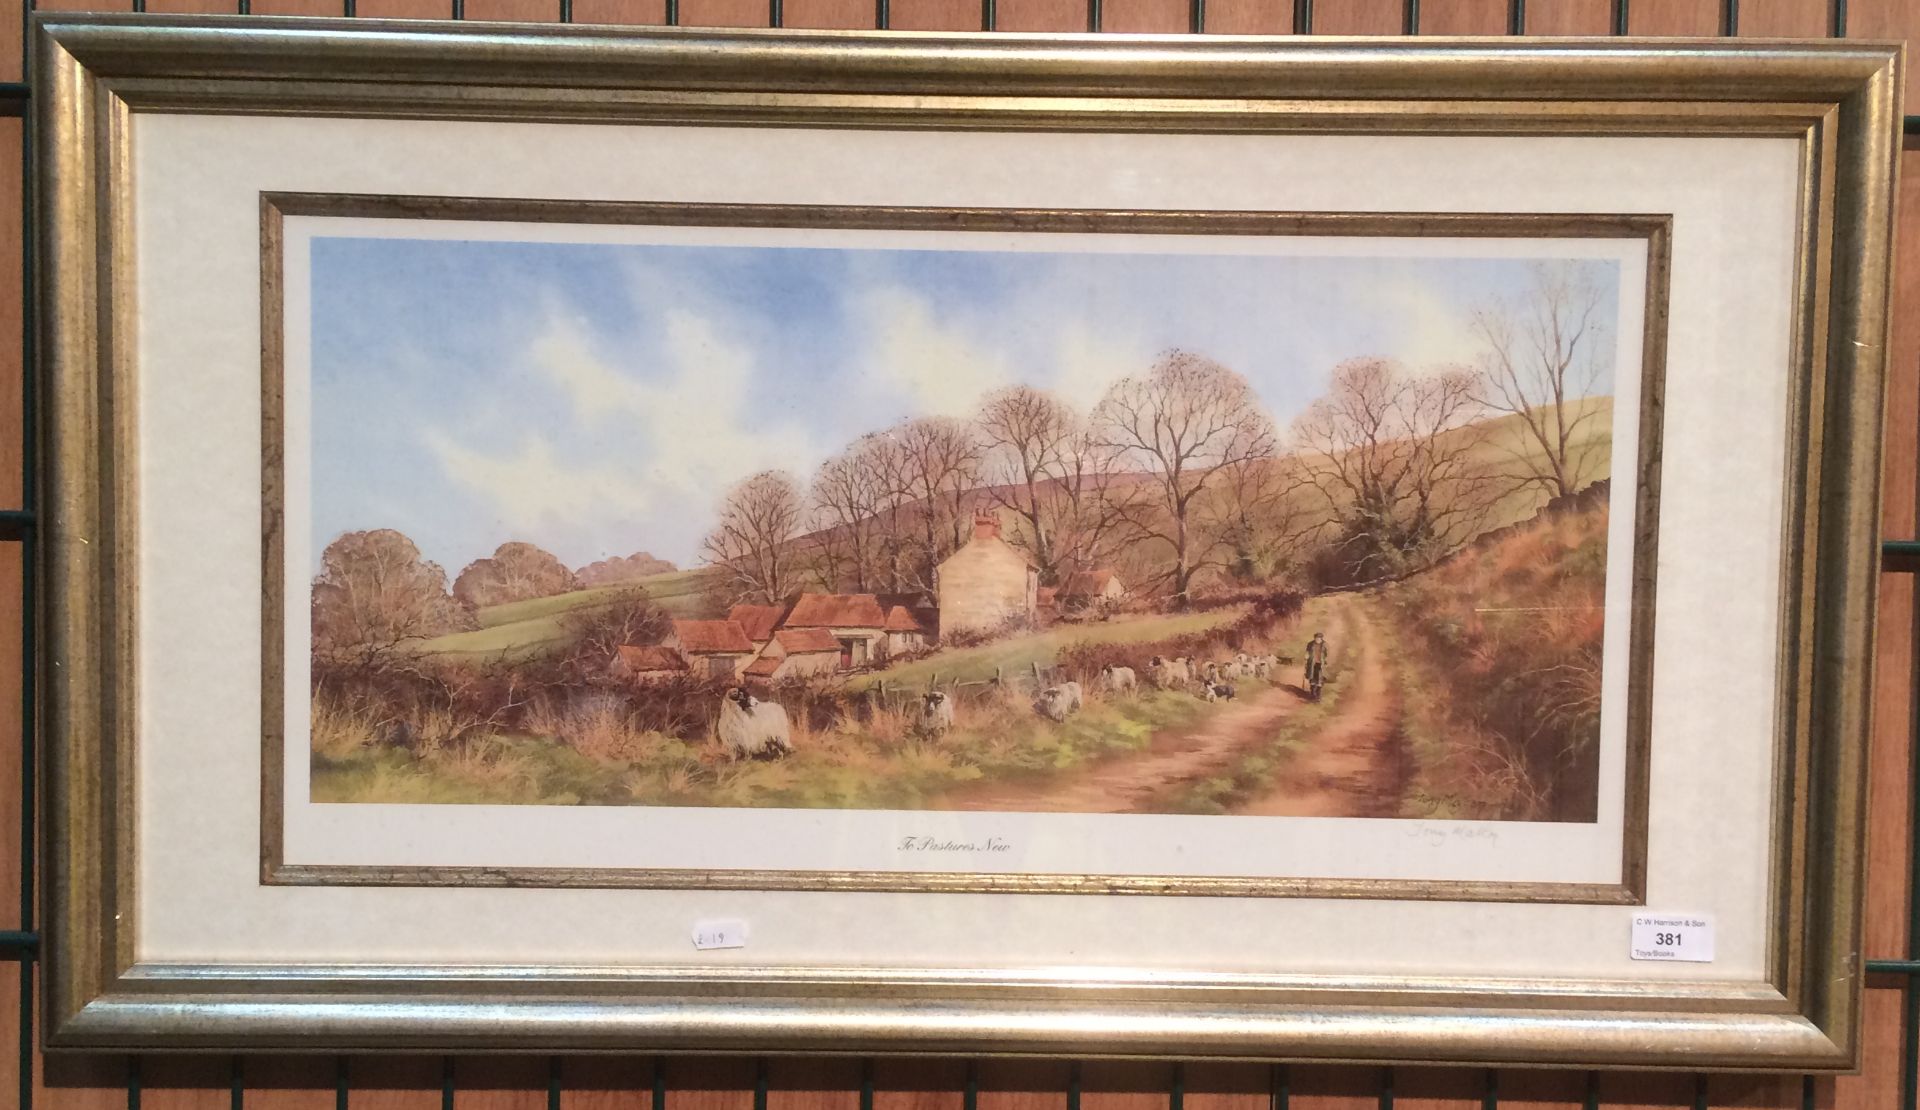 Tony Malton '94' framed print 'To Pastures New' 30 x 62cm signed in pencil